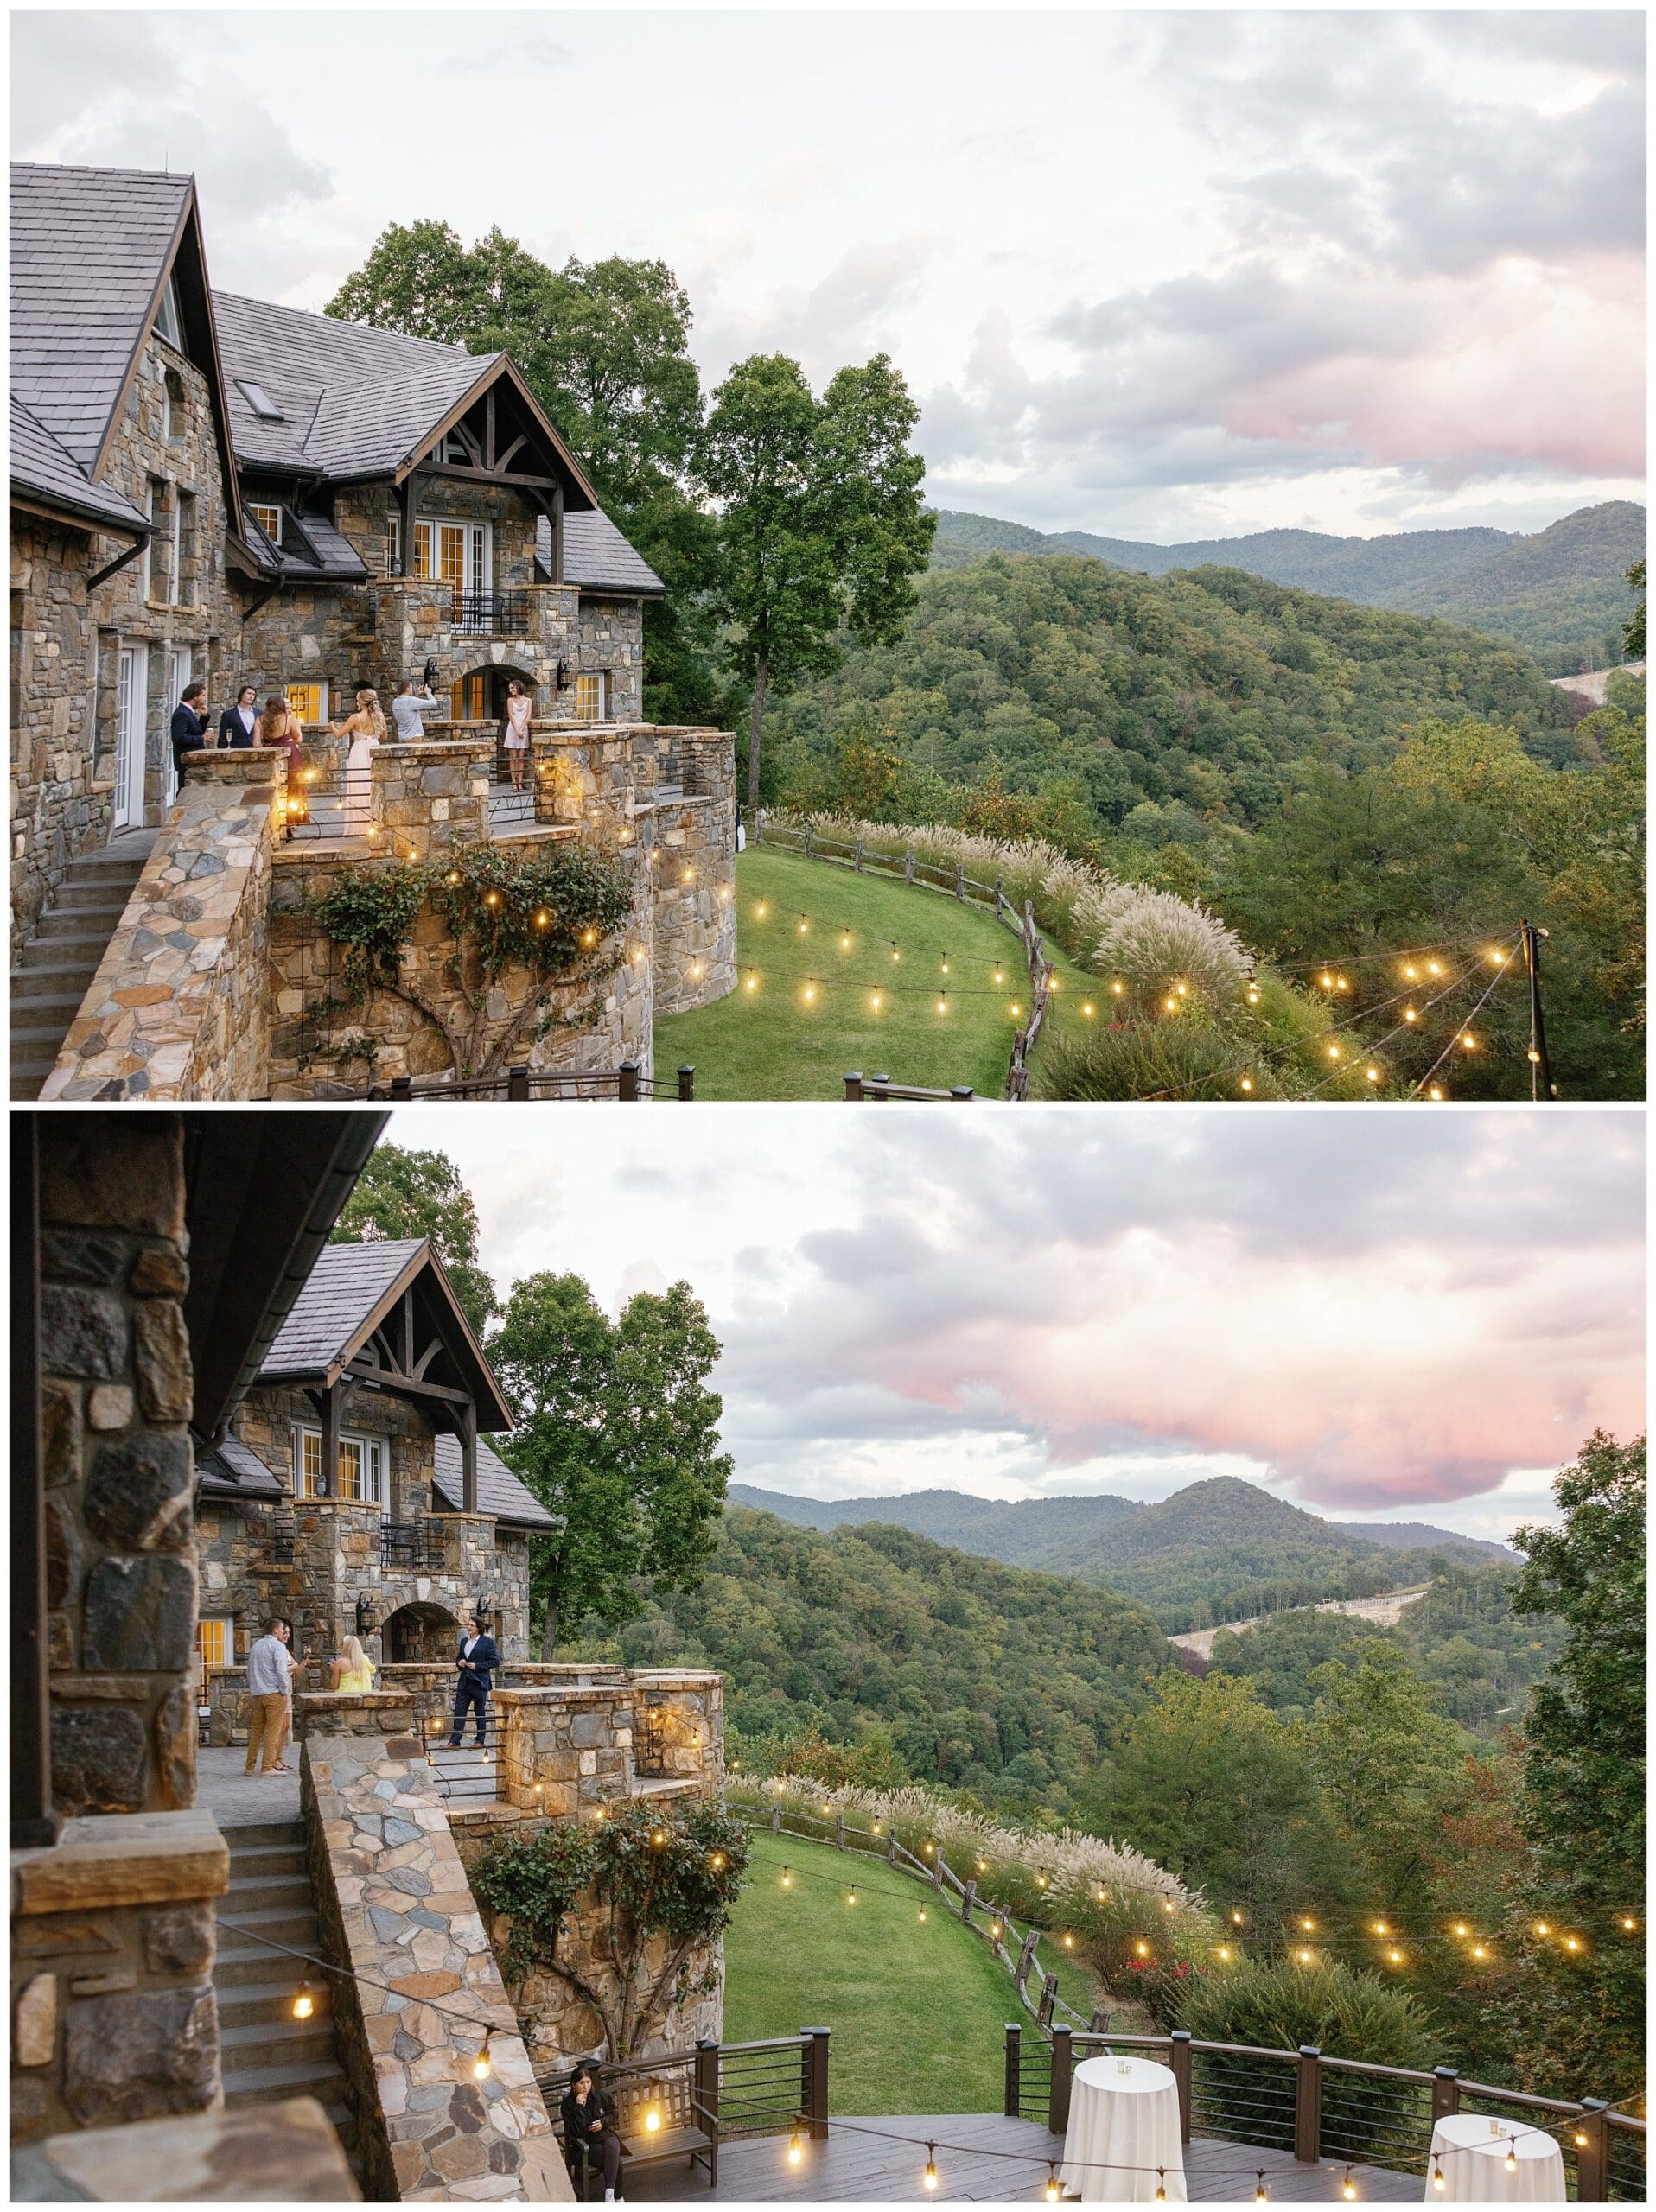 Two pictures of a wedding reception at a mountain house.